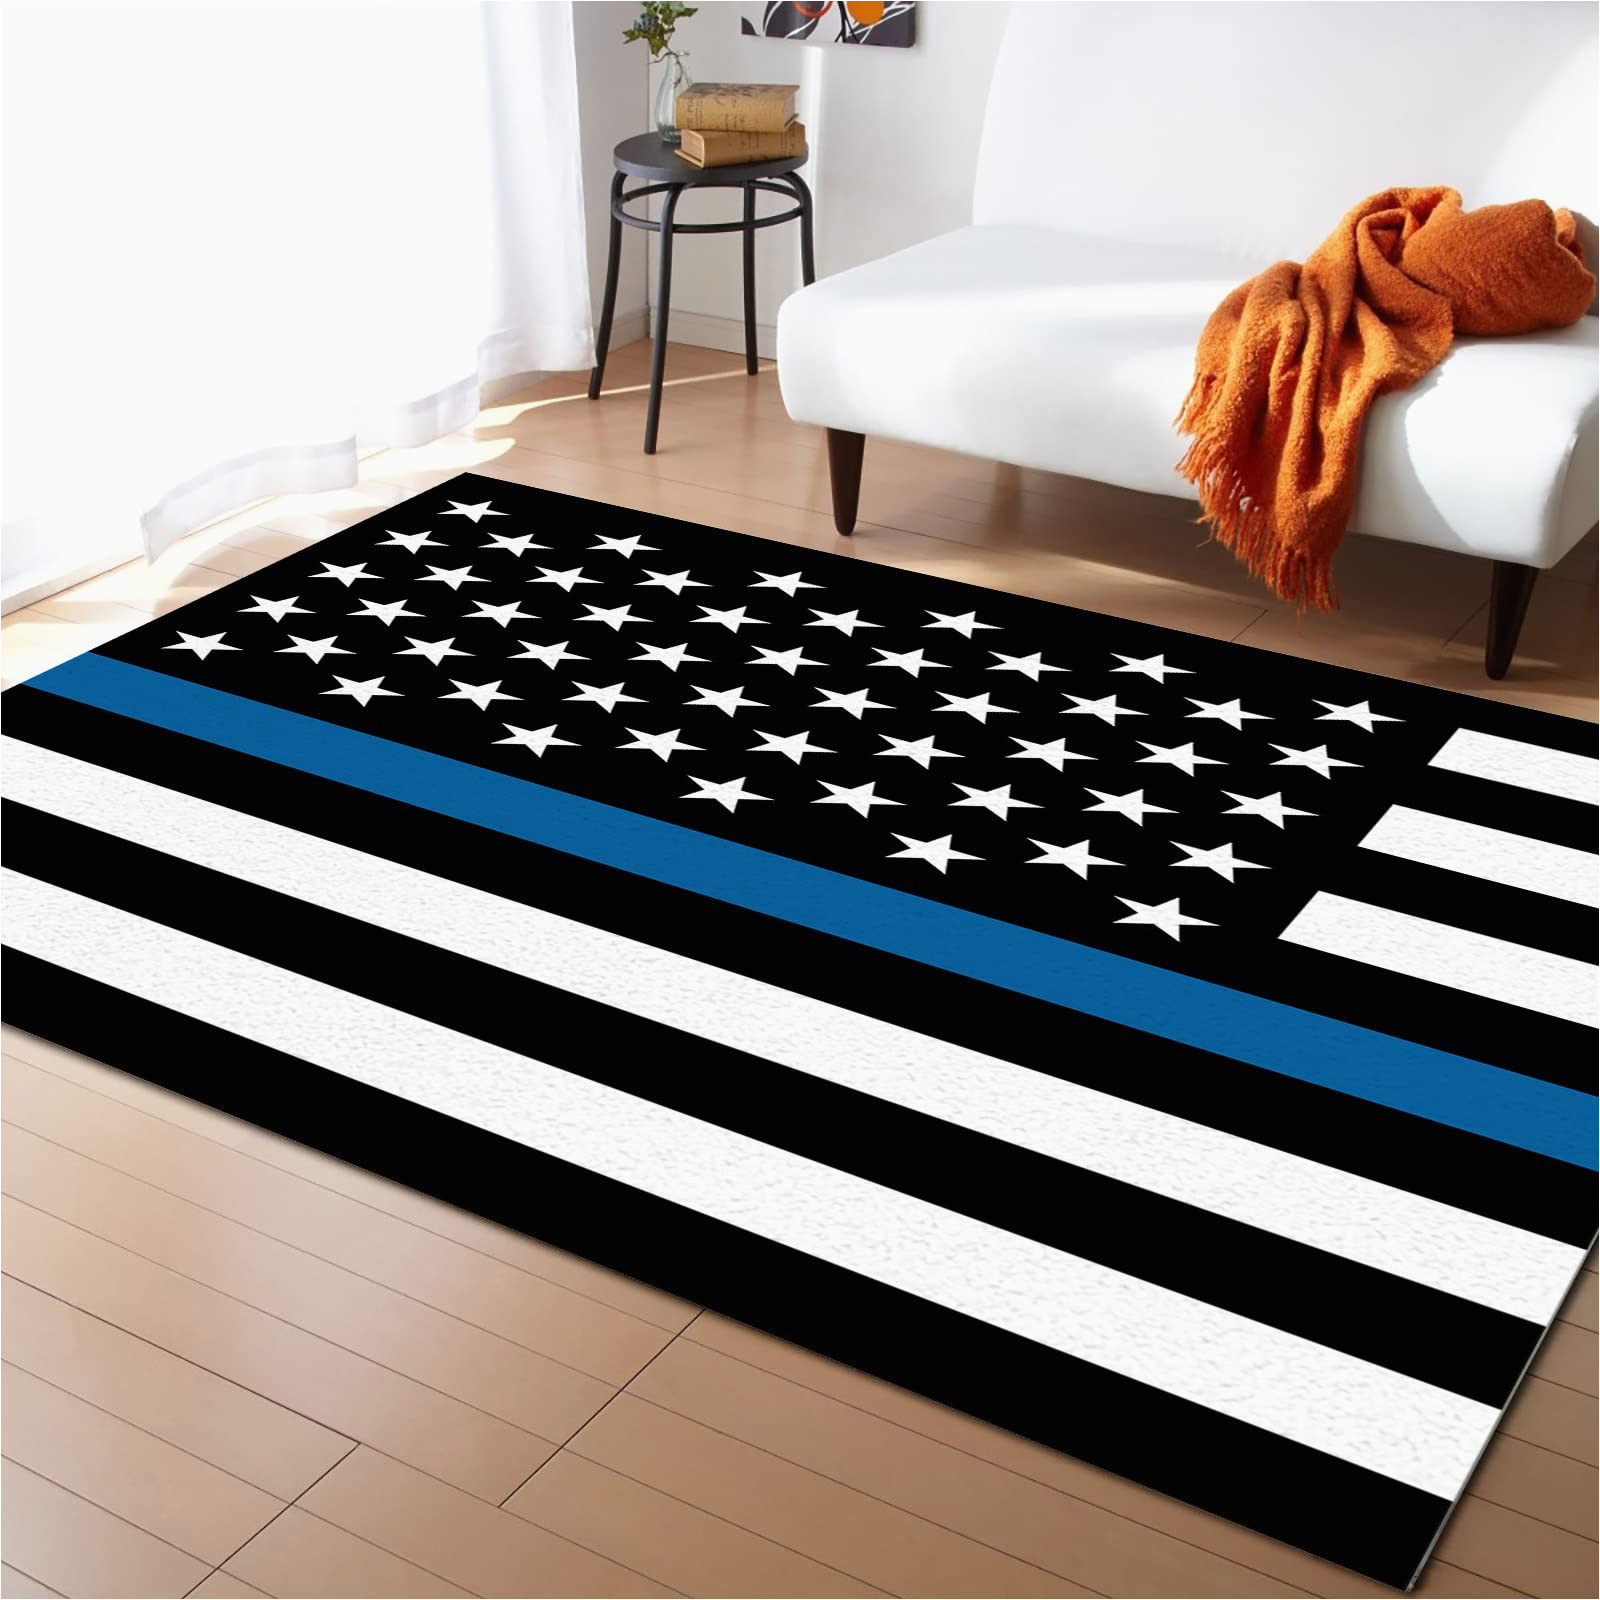 Thin Blue Line Rug area Rug Thin Blue Line Flag American Police Flag Honoring Law Enforcement Officers Floor Carpet Low Pile Non-slip Indoor area Rugs for Dining Room …